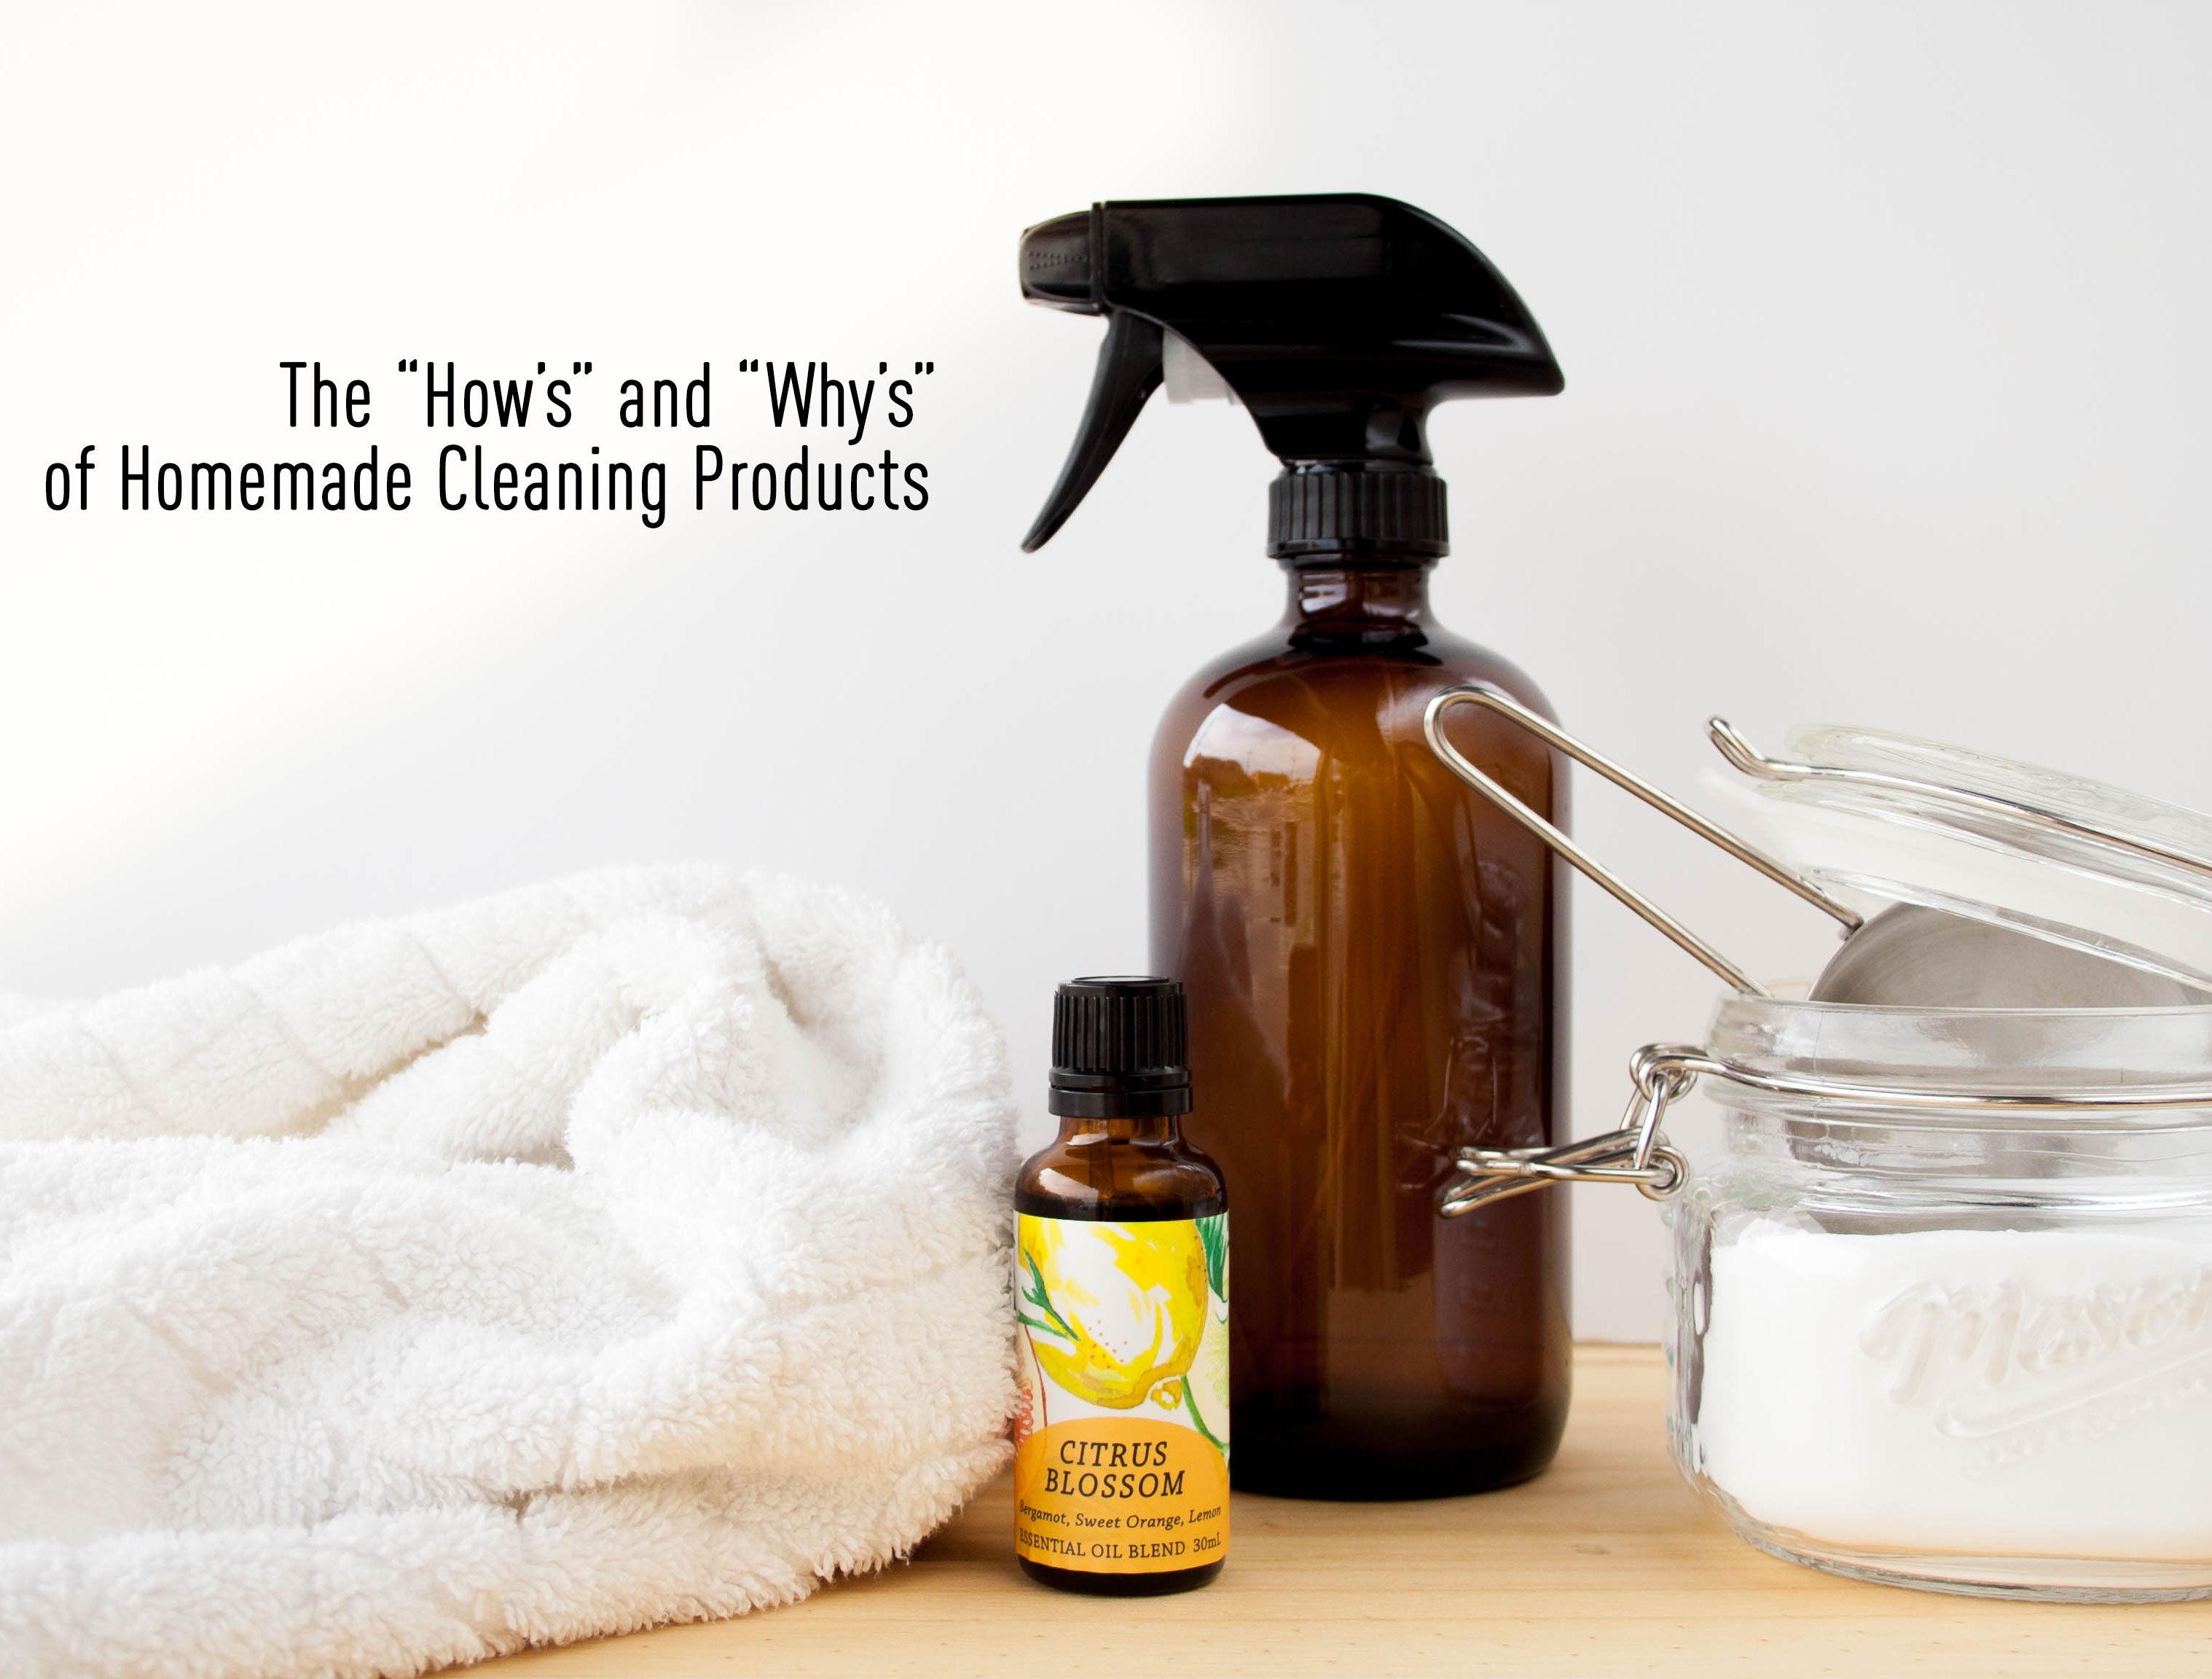 The "How's" & "Why's' of Homemade DIY Natural Cleaning Products